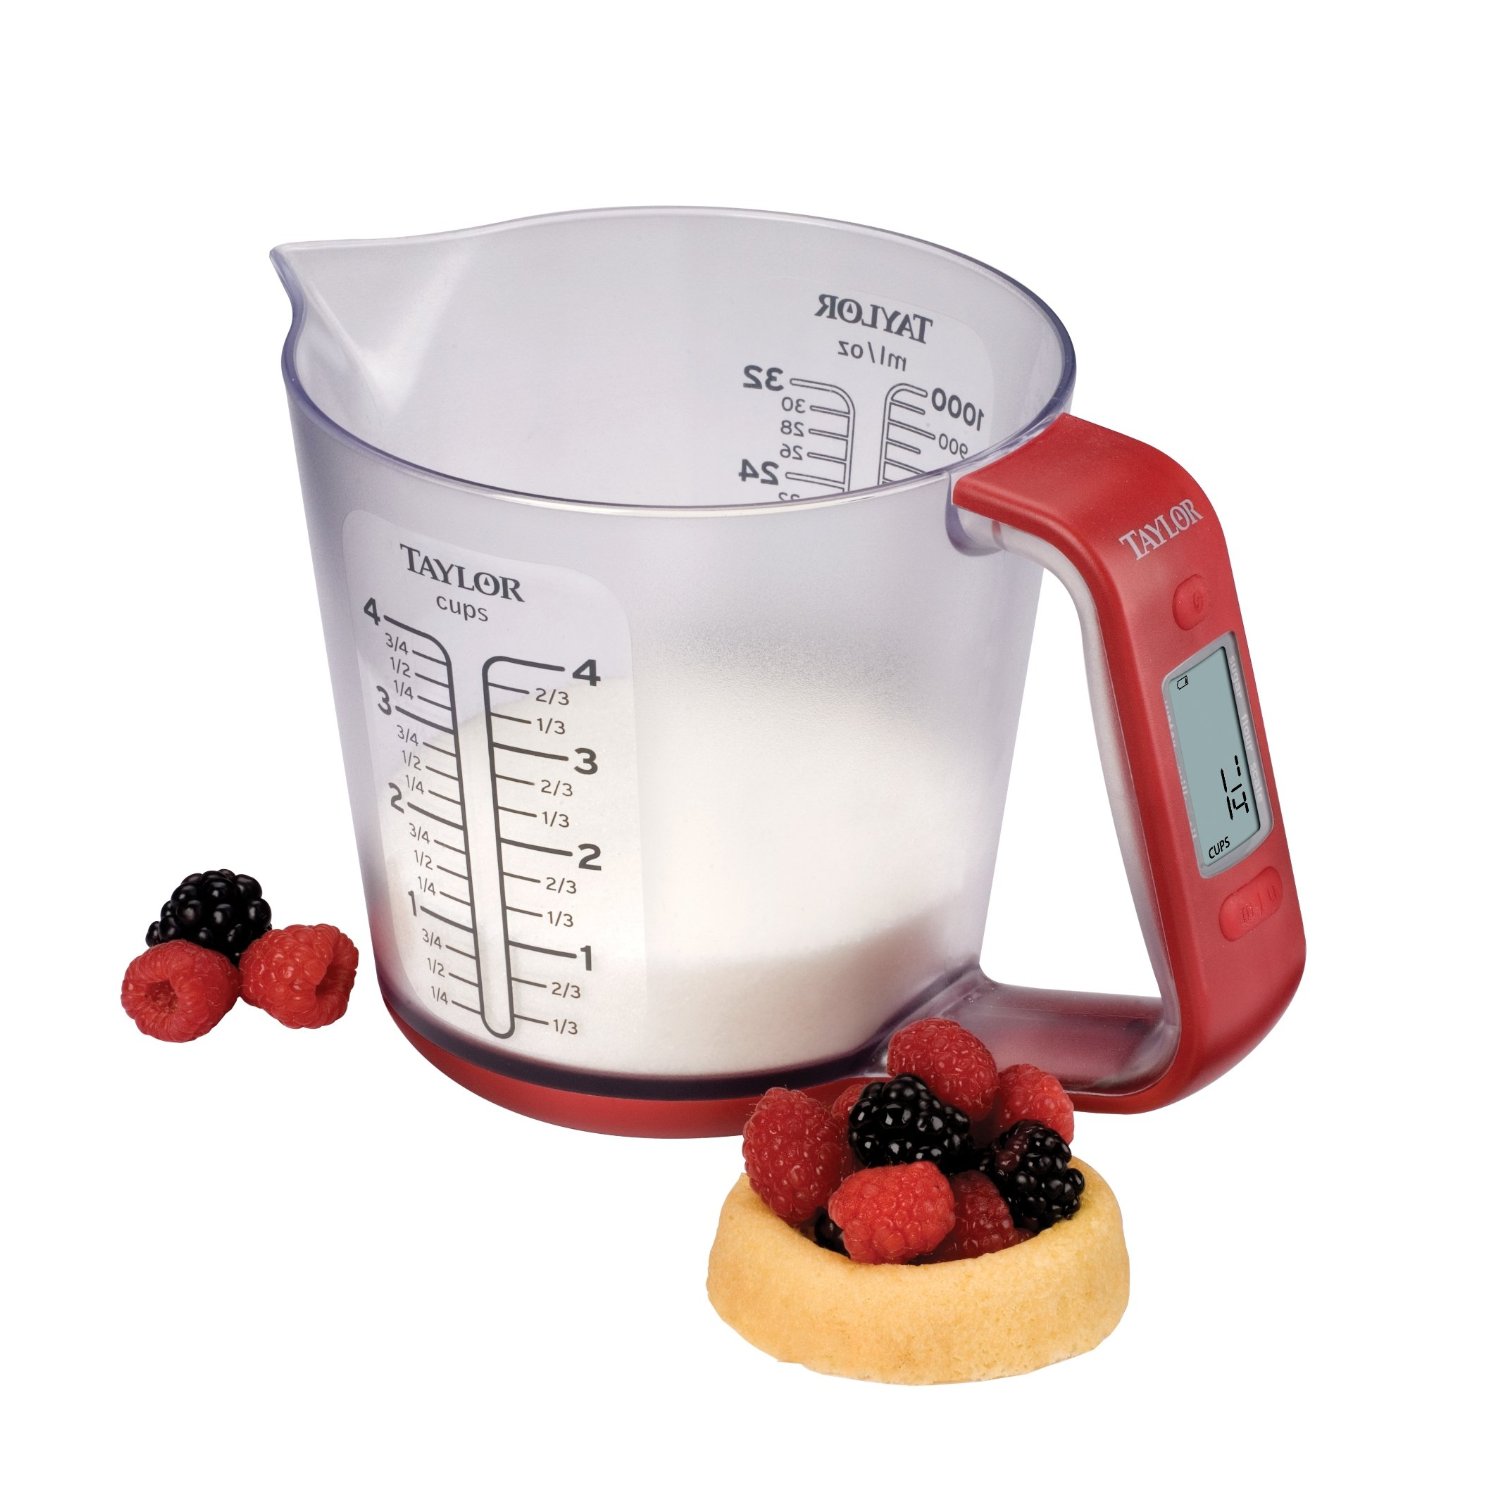 Taylor Digital Measuring Cup and Scale $20.49